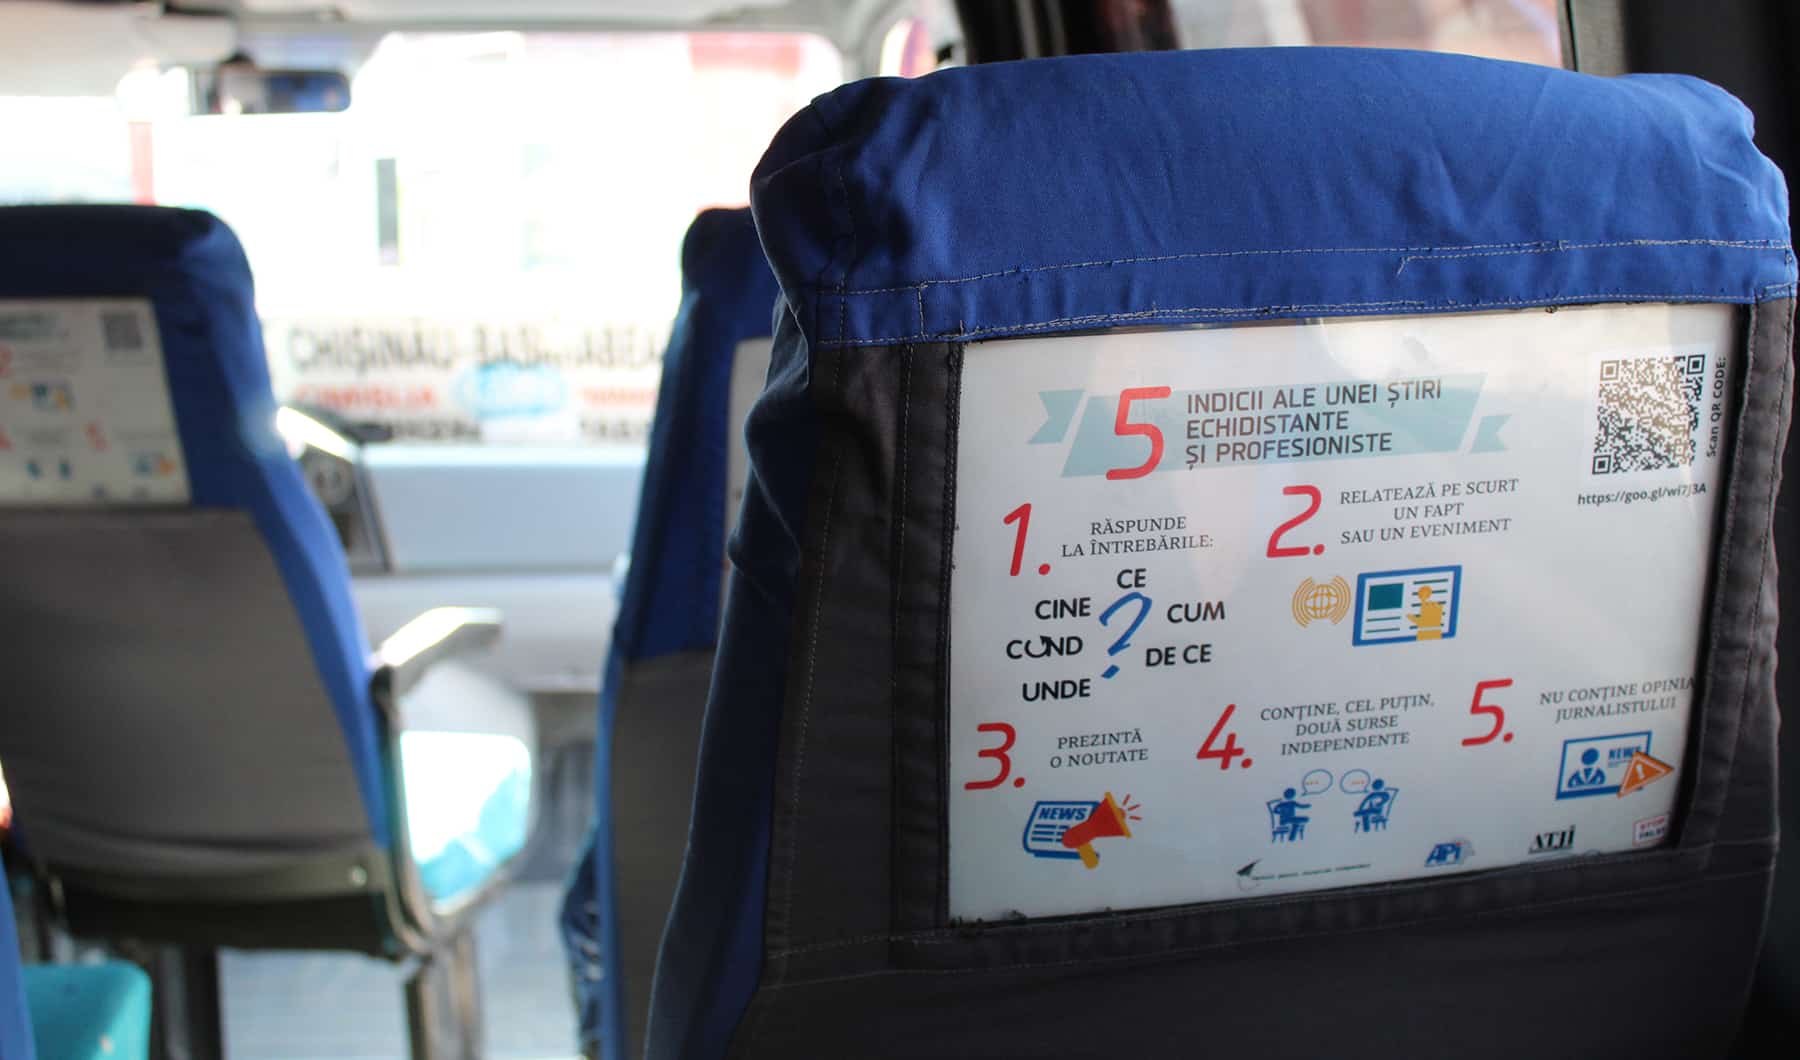 A poster is applied to the back of a seat in a mini bus